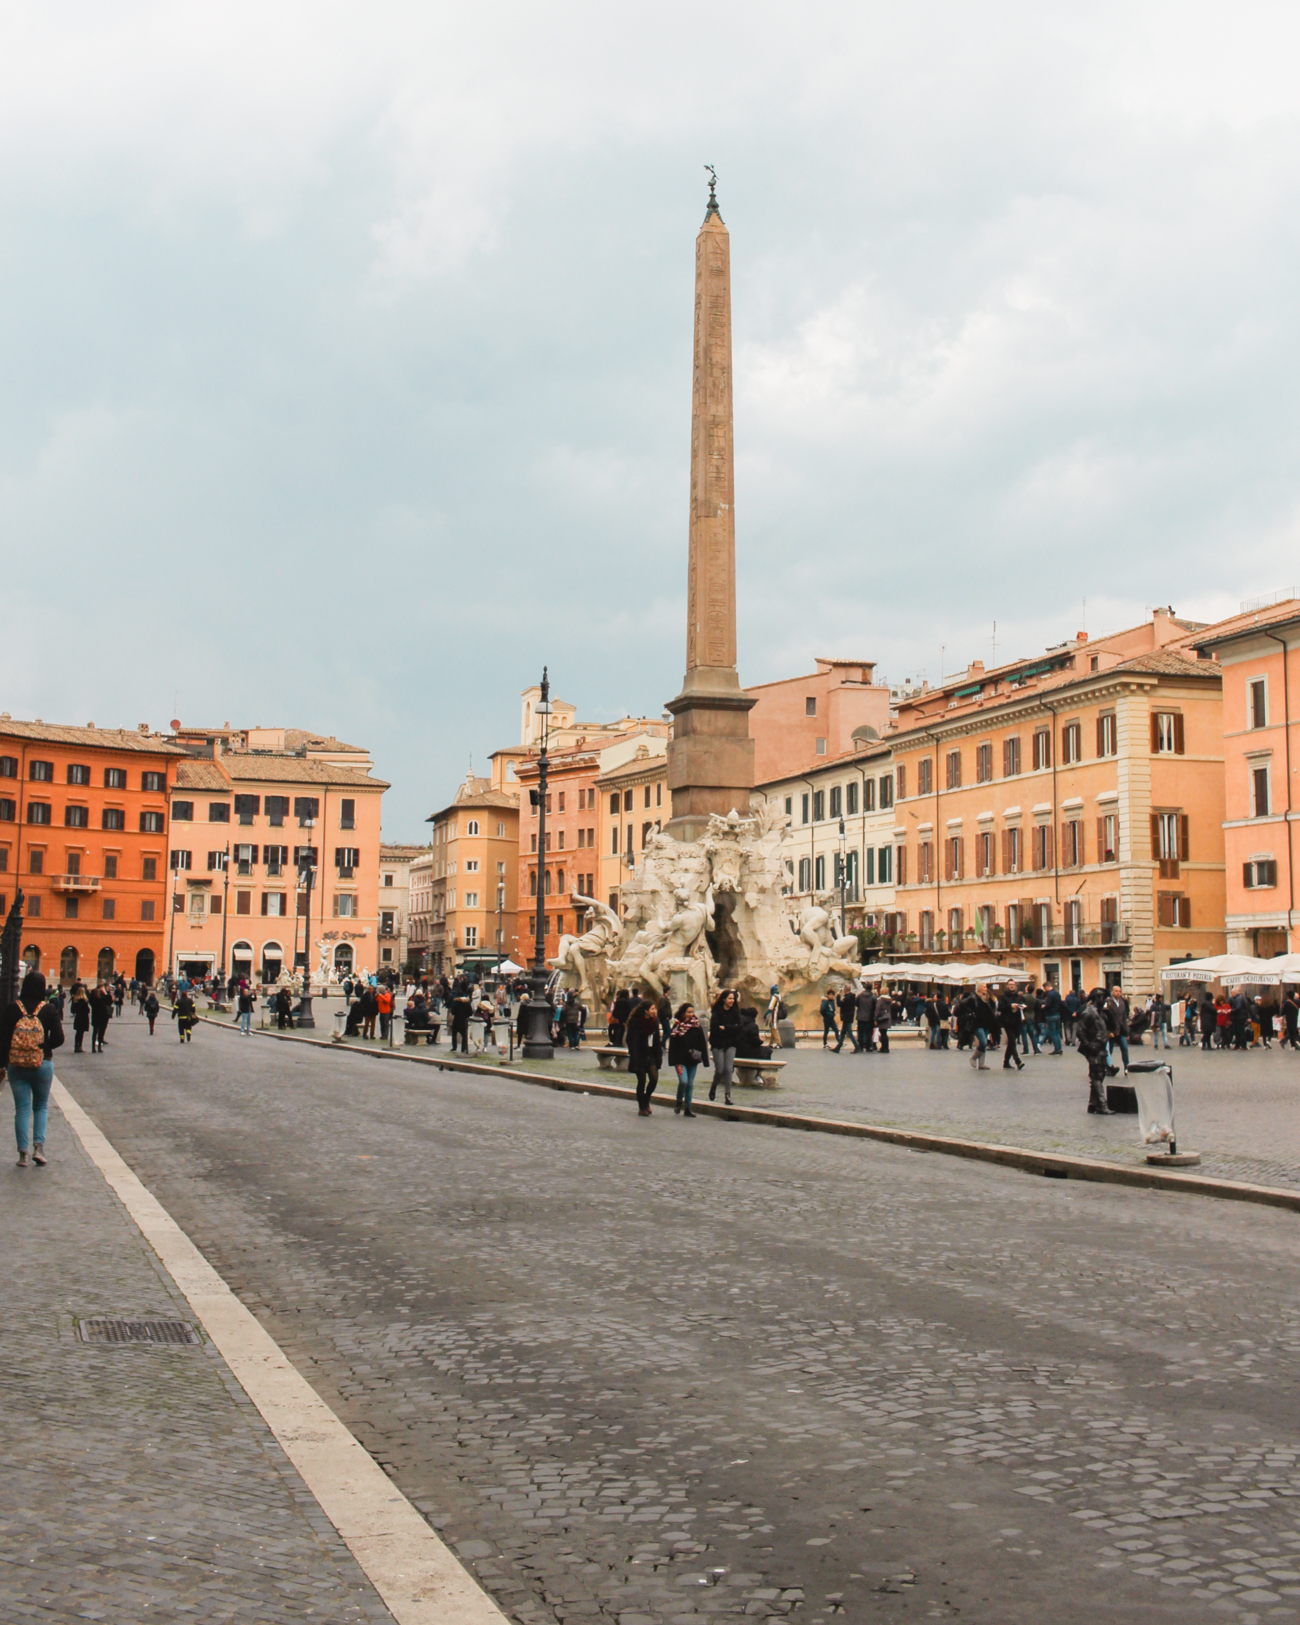 25 things you must do in Rome, Italy | Piazza Navona